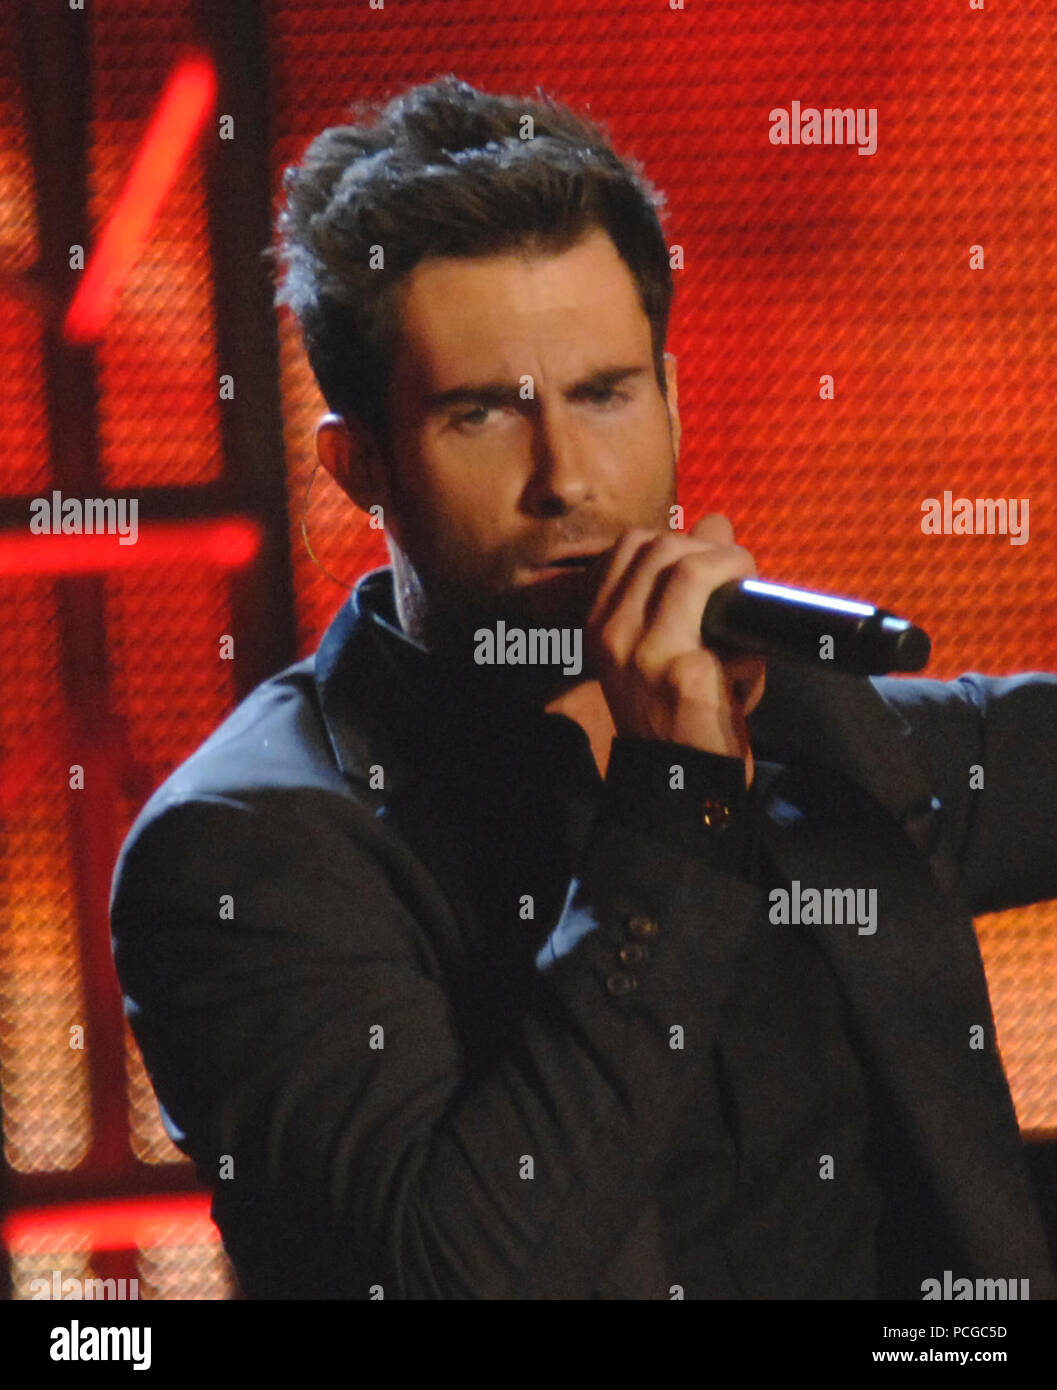 Maroon 5's Adam Levine performs at the Neighborhood Ball in downtown Washington, D.C., Jan. 20, 2009. More than 5,000 men and women in uniform are providing military ceremonial support to the presidential inauguration, a tradition dating back to George Washington's 1789 inauguration. ( Stock Photo